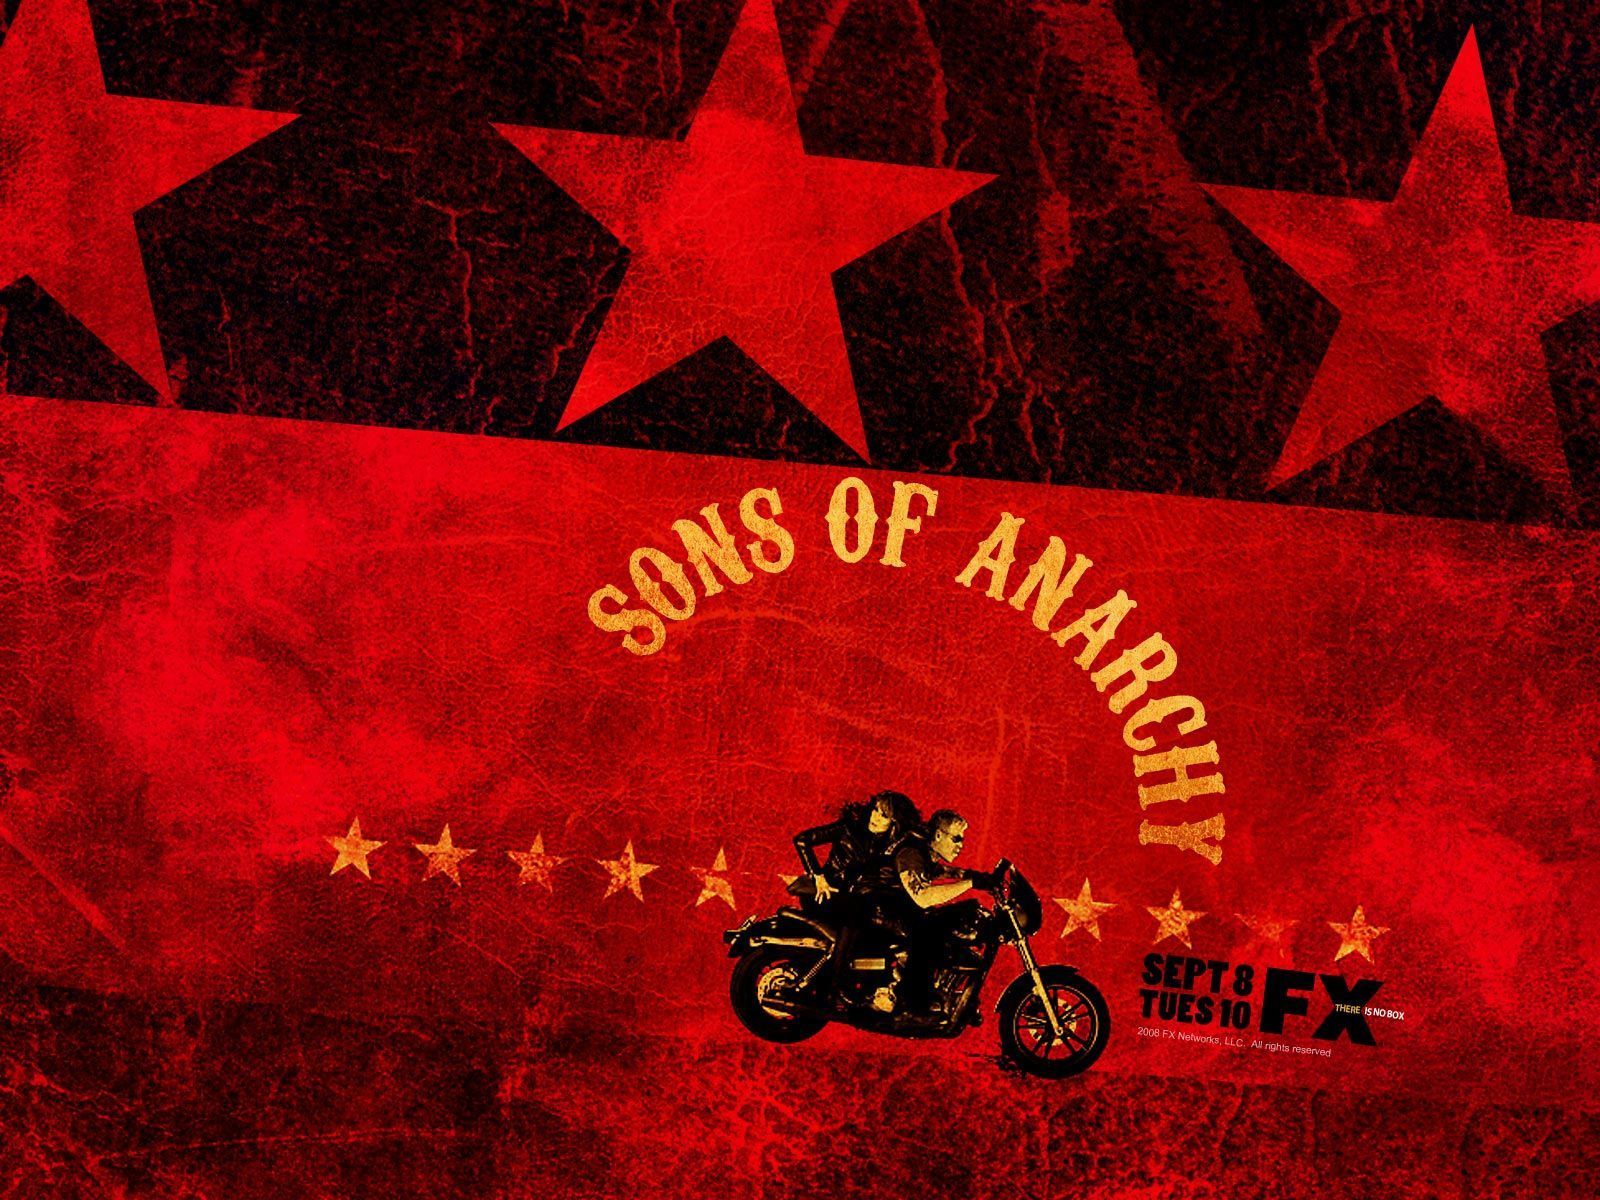 Sons Of Anarchy Free Desktop Wallpapers for HD, Widescreen and other